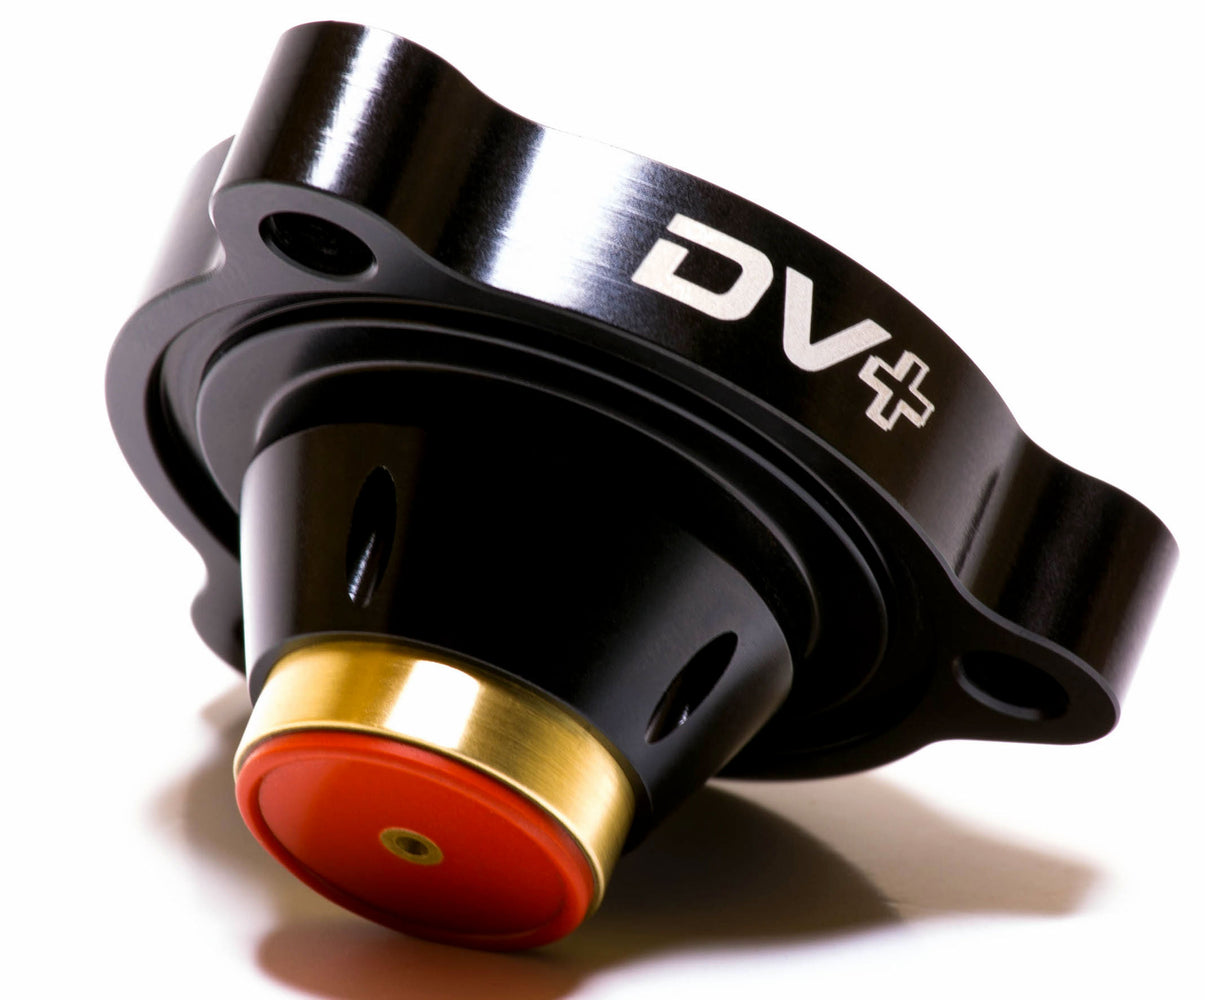 DV+ T9351 (Suits late model VAG & Euro Applications)